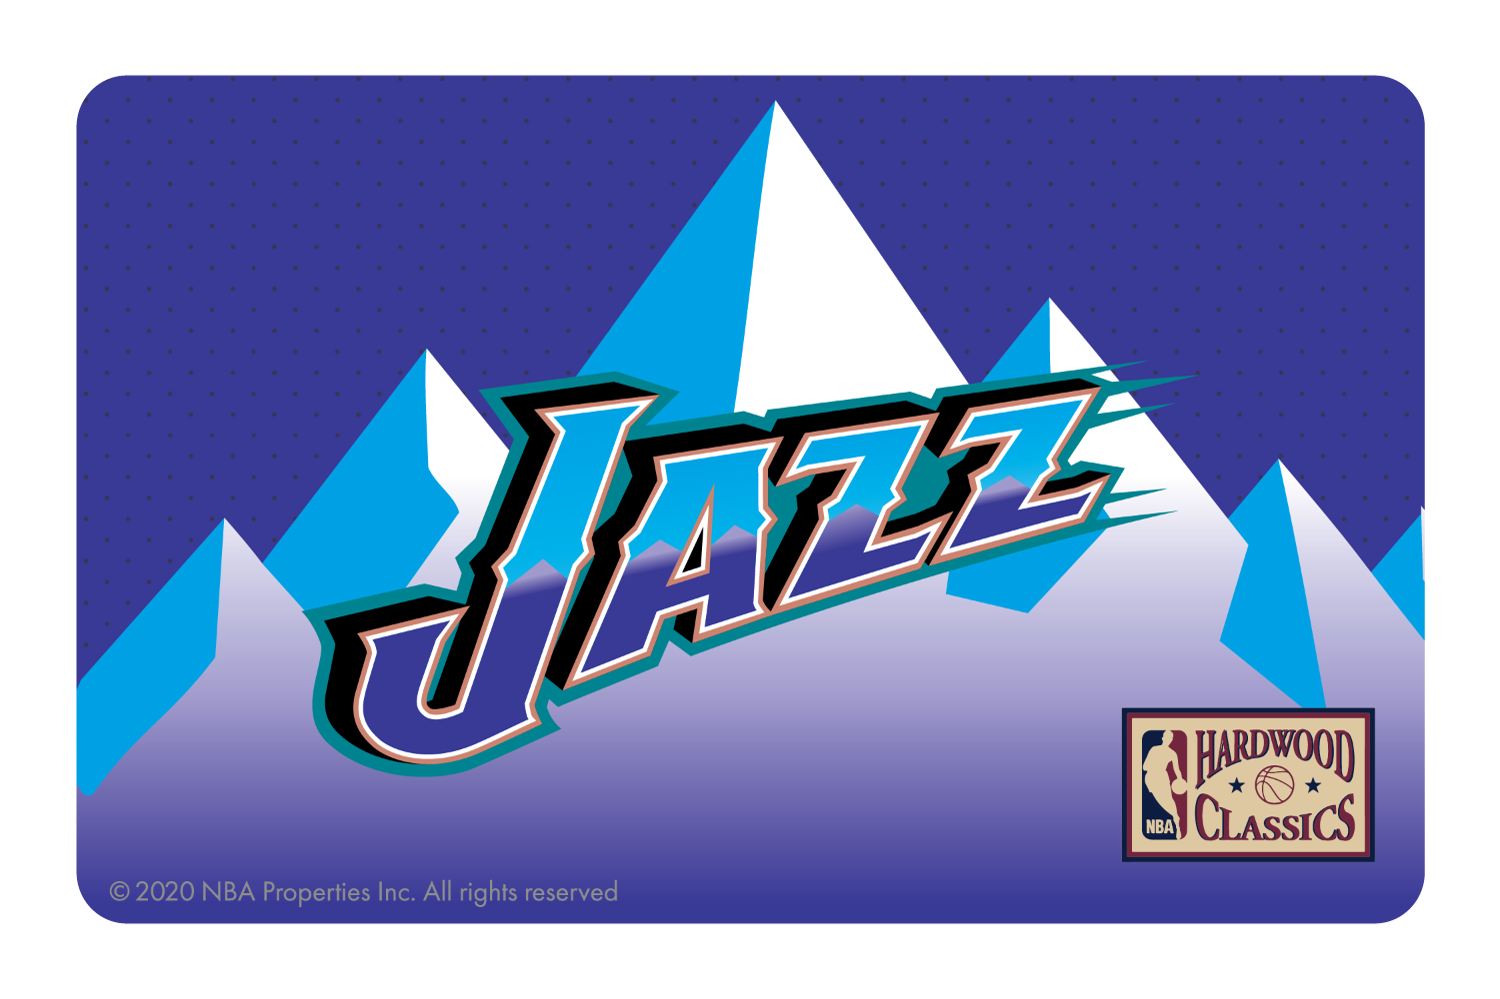 Utah Jazz Logo - Jazz in purple and blue against mountains in a